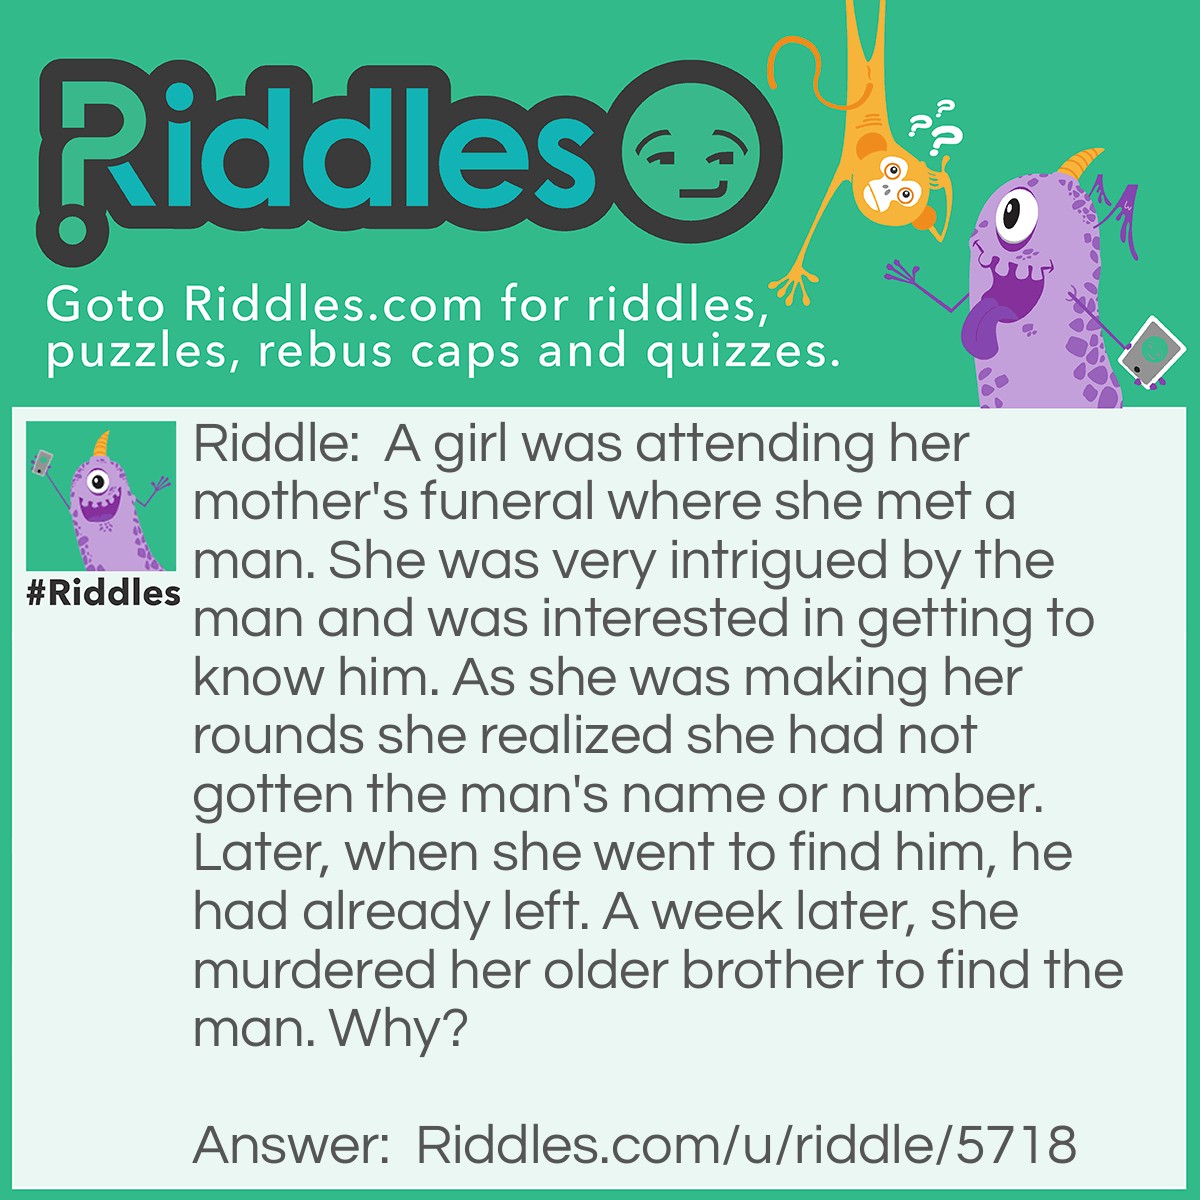 Riddle: A girl was attending her mother's funeral where she met a man. She was very intrigued by the man and was interested in getting to know him. As she was making her rounds she realized she had not gotten the man's name or number. Later, when she went to find him, he had already left. A week later, she murdered her older brother to find the man. Why? Answer: So the man would attend the funeral again.